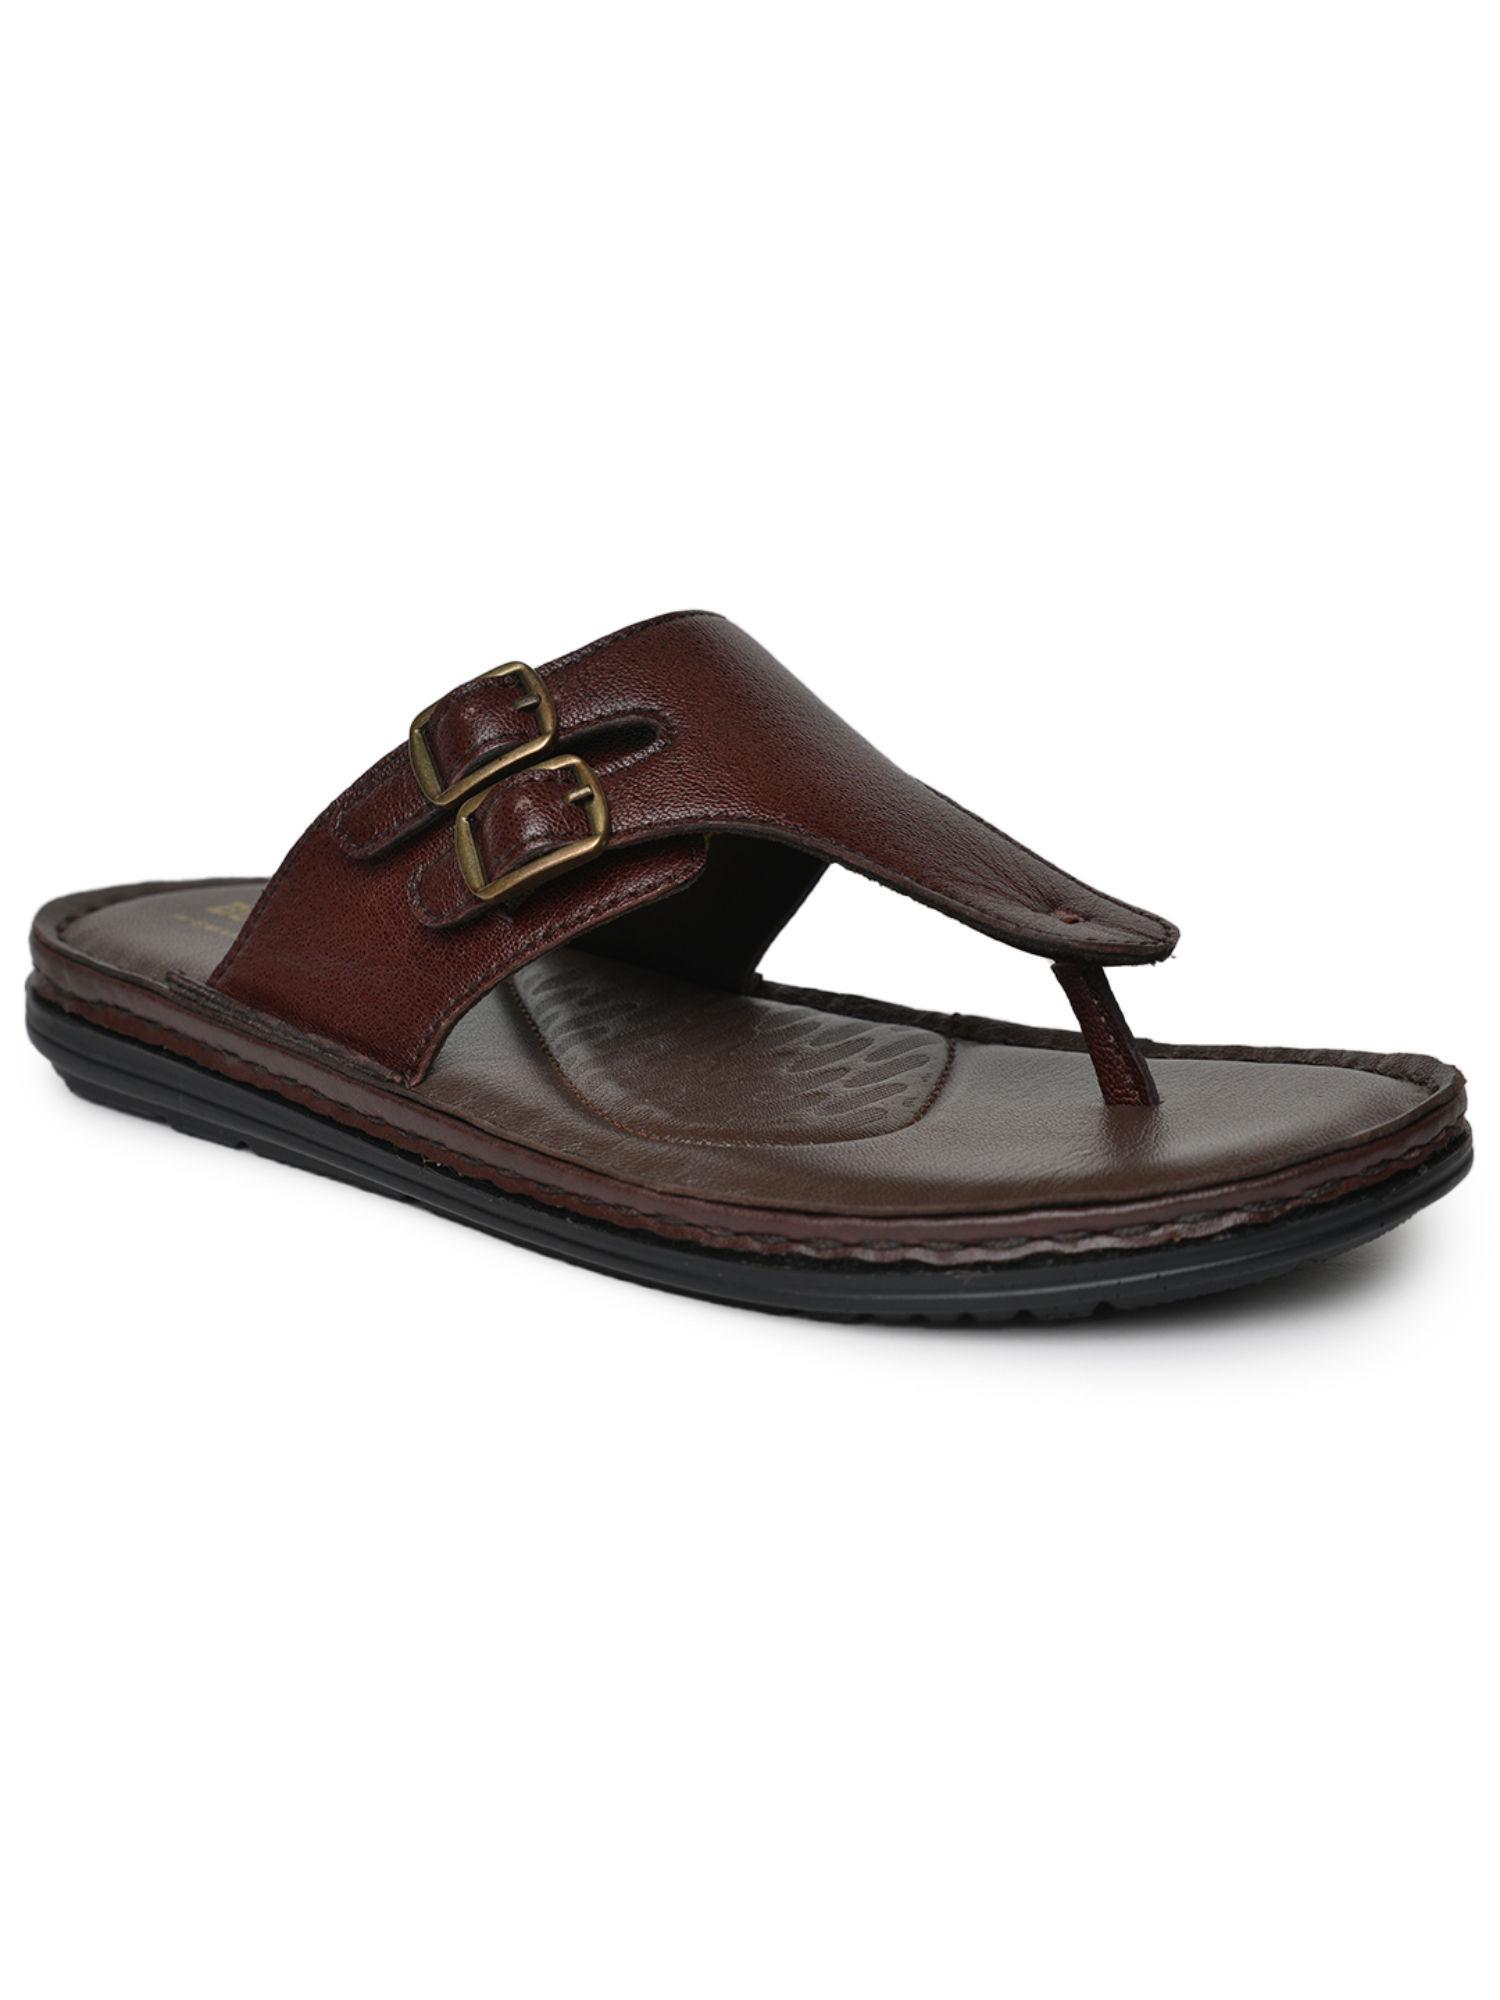 ace full grain natural leather brown casual sandal chappal